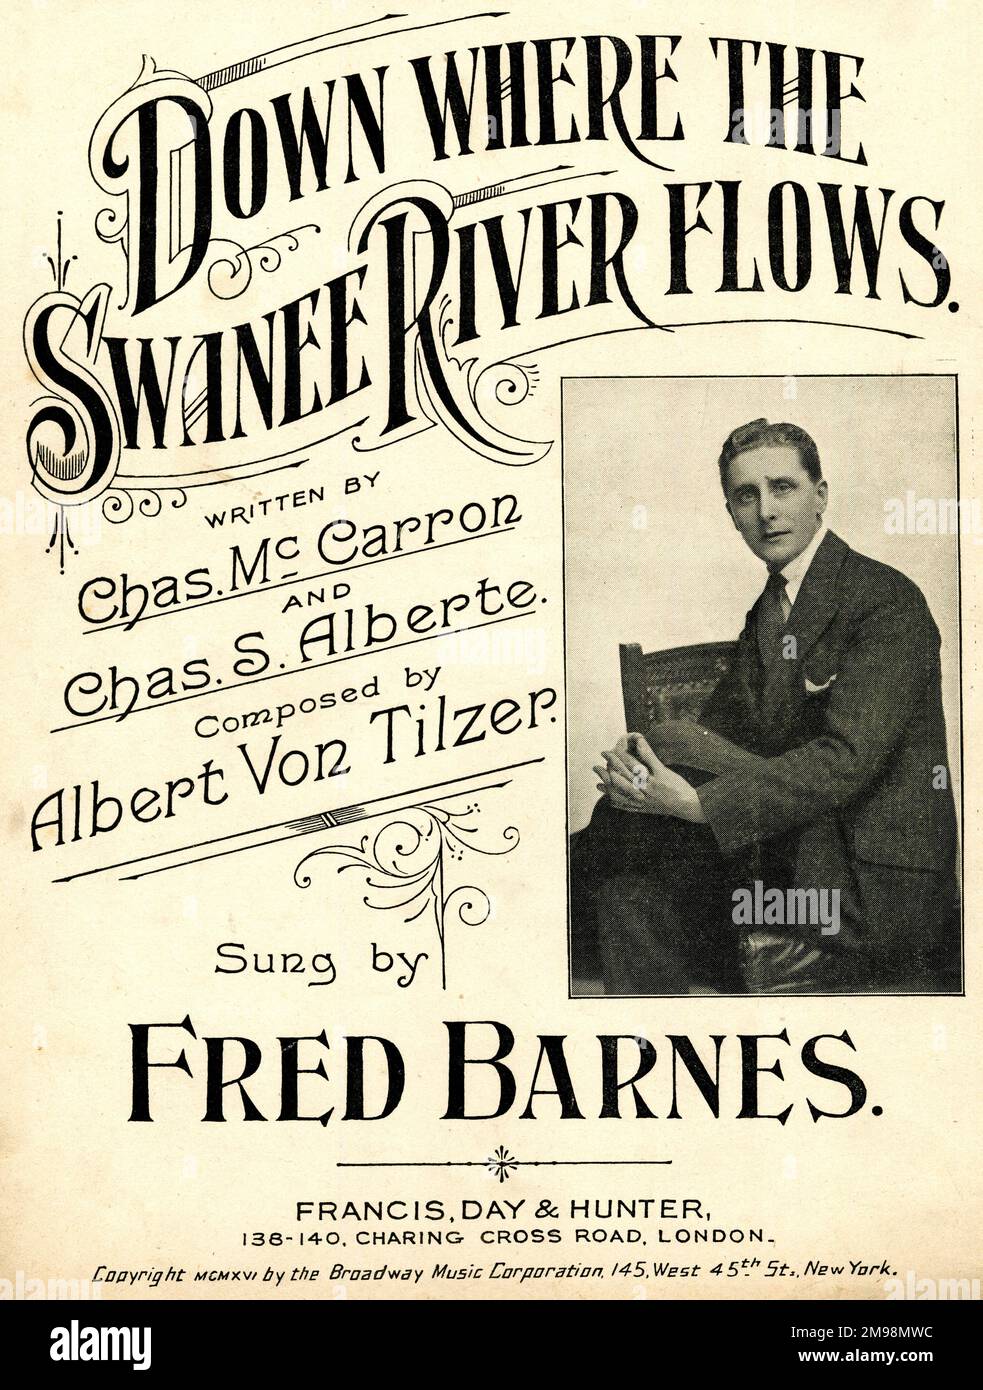 Music cover, Down Where the Swanee River Flows, written by Charles McCarron and Charles S Alberte, composed by Albert Von Tilzer, sung by Fred Barnes. Stock Photo